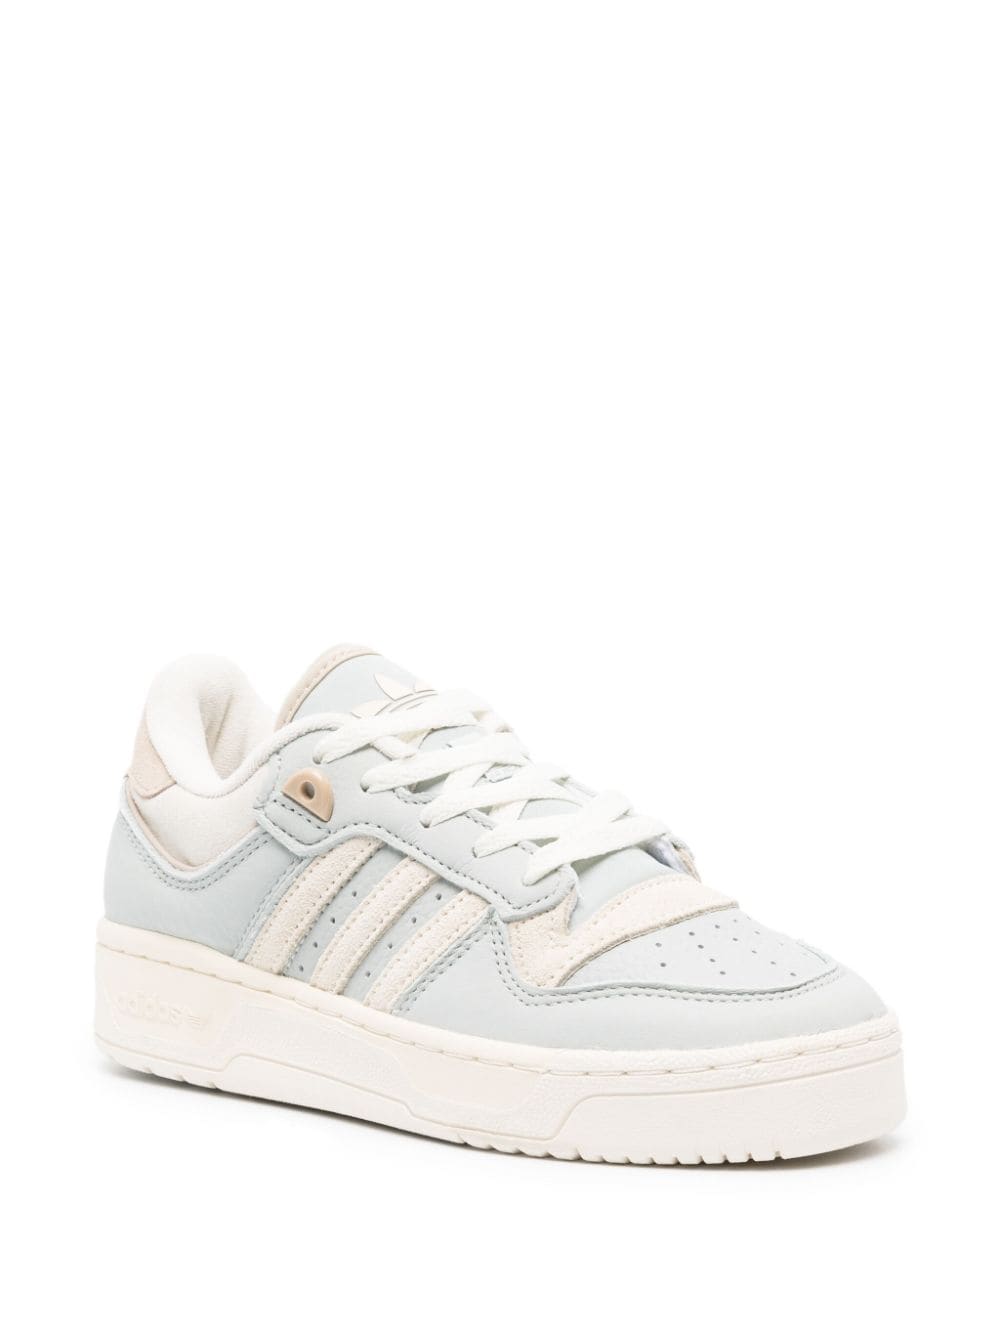 Shop Adidas Originals Rivalry 86 Leather Sneakers In Blue